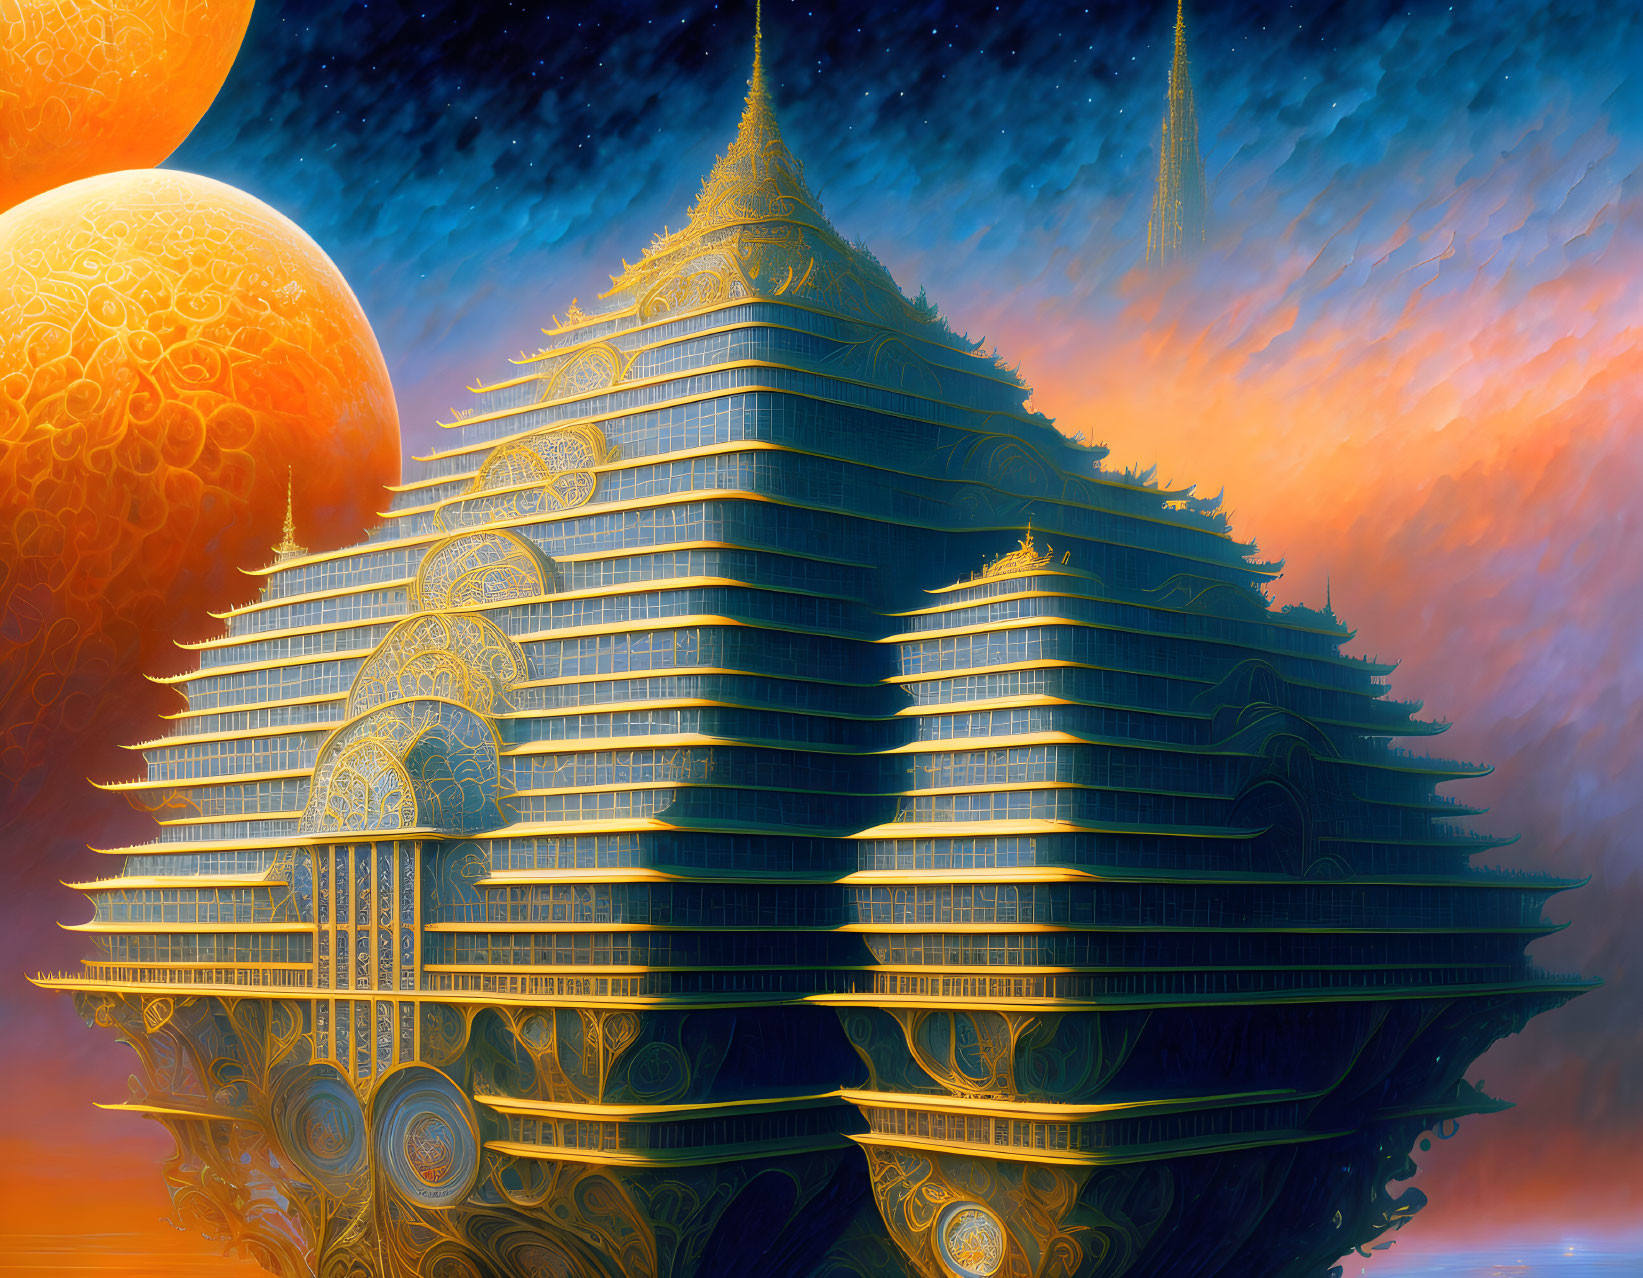 Futuristic pagoda structure with celestial backdrop